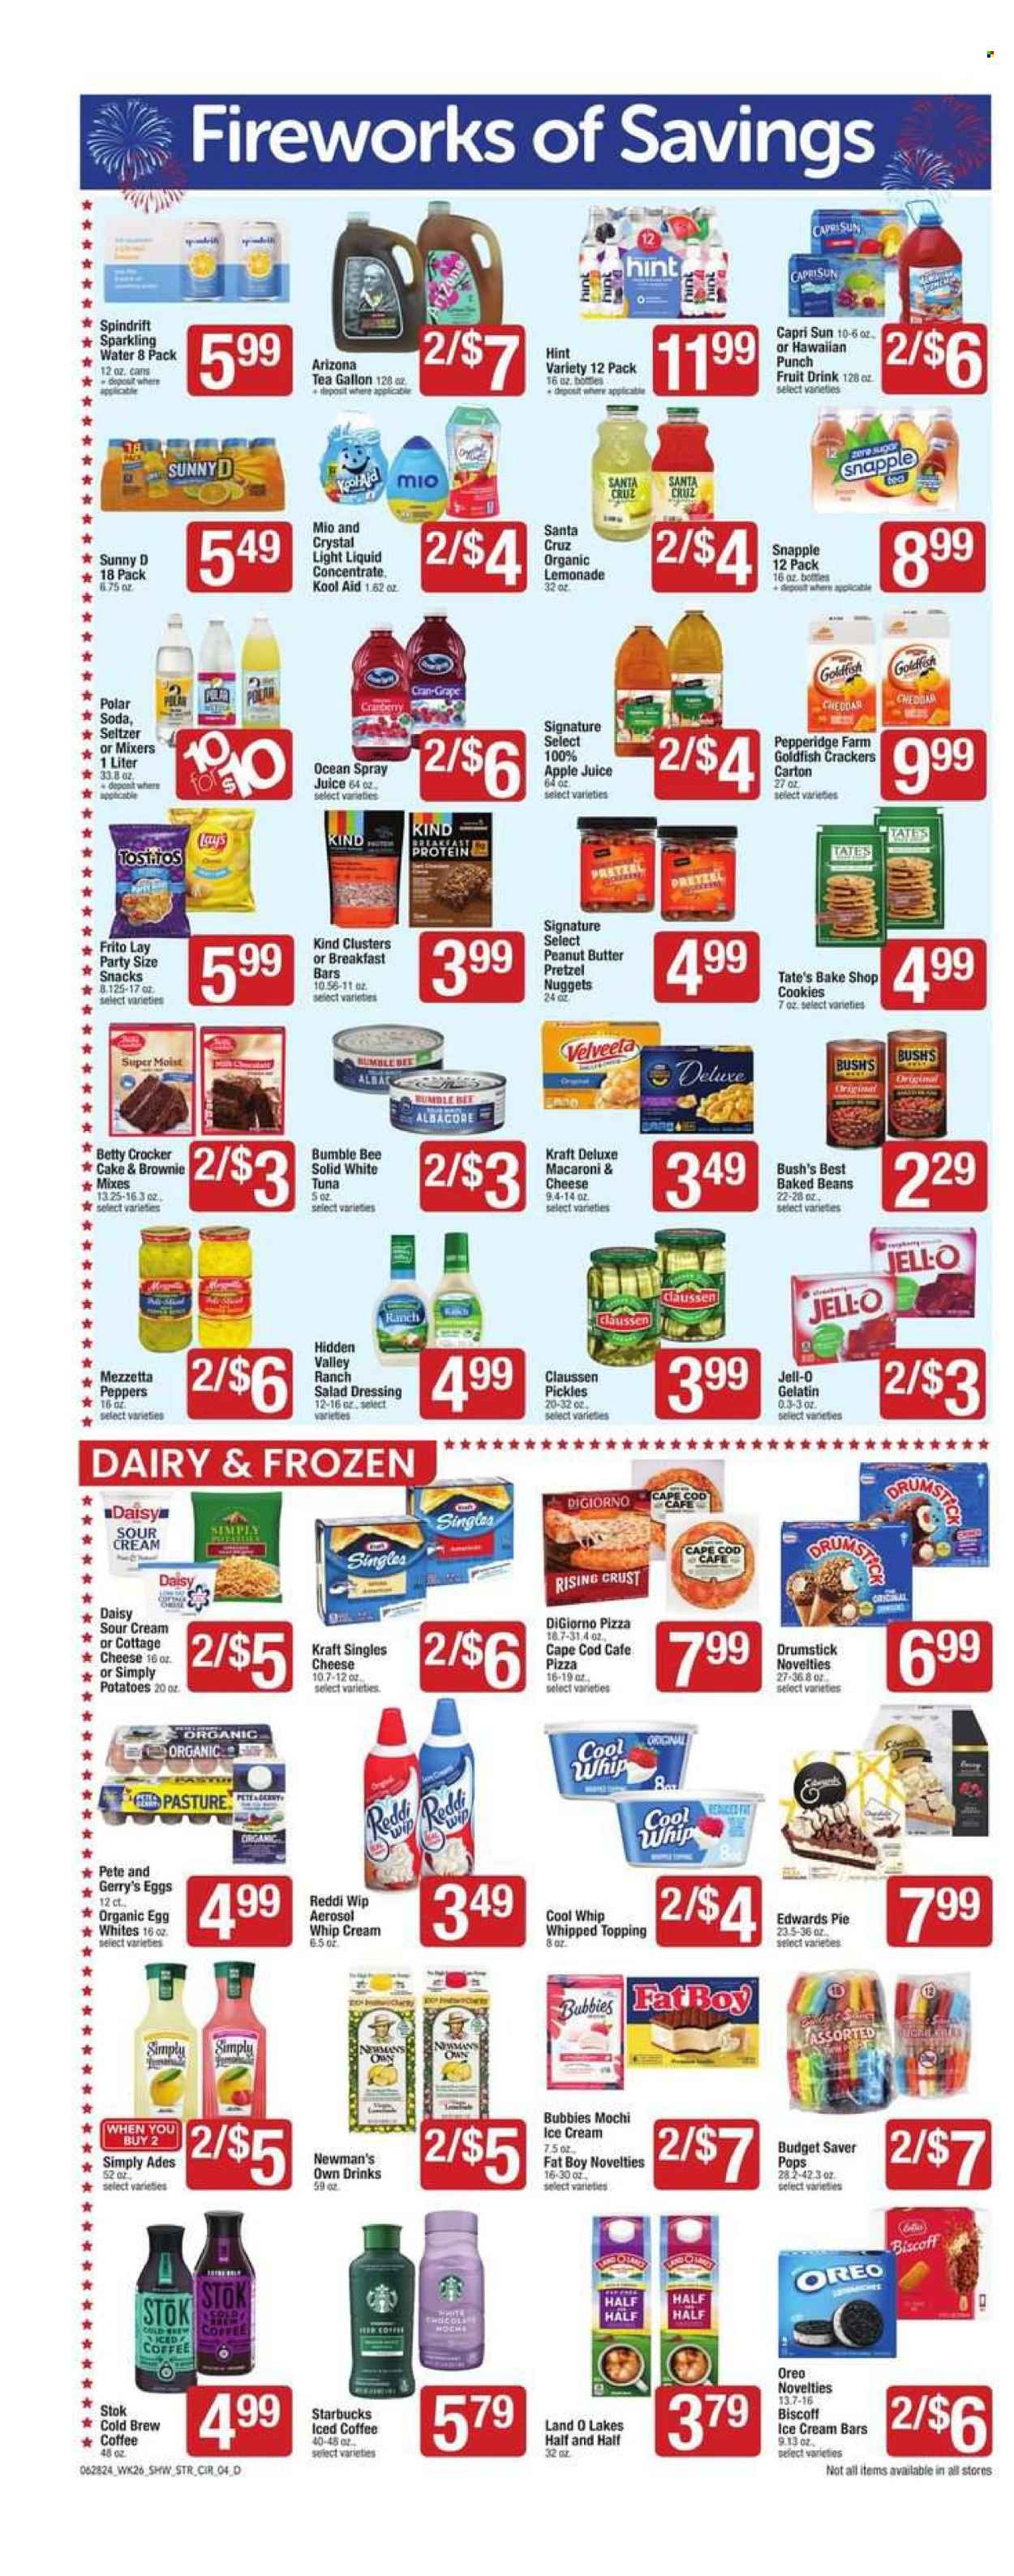 thumbnail - Star Market Flyer - 06/28/2024 - 07/04/2024 - Sales products - pretzels, pie, dessert, brownie mix, potatoes, tuna, macaroni & cheese, pizza, snack, nuggets, pasta, Bumble Bee, Kraft®, ready meal, cottage cheese, sandwich slices, Kraft Singles, Velveeta, Oreo, eggs, Cool Whip, sour cream, ice cream, ice cream bars, cookies, crackers, dipped cluster, Lay’s, Goldfish, salty snack, topping, Jell-O, baking mix, canned tuna, pickles, baked beans, canned fish, pickled vegetables, salad dressing, dressing, syrup, apple juice, Capri Sun, lemonade, juice, fruit drink, ice tea, Cran-Grape, AriZona, Snapple, Spindrift, Sunny D, seltzer water, soda, sparkling water, water, iced coffee, powder drink, coffee drink, Starbucks, Half and half. Page 4.